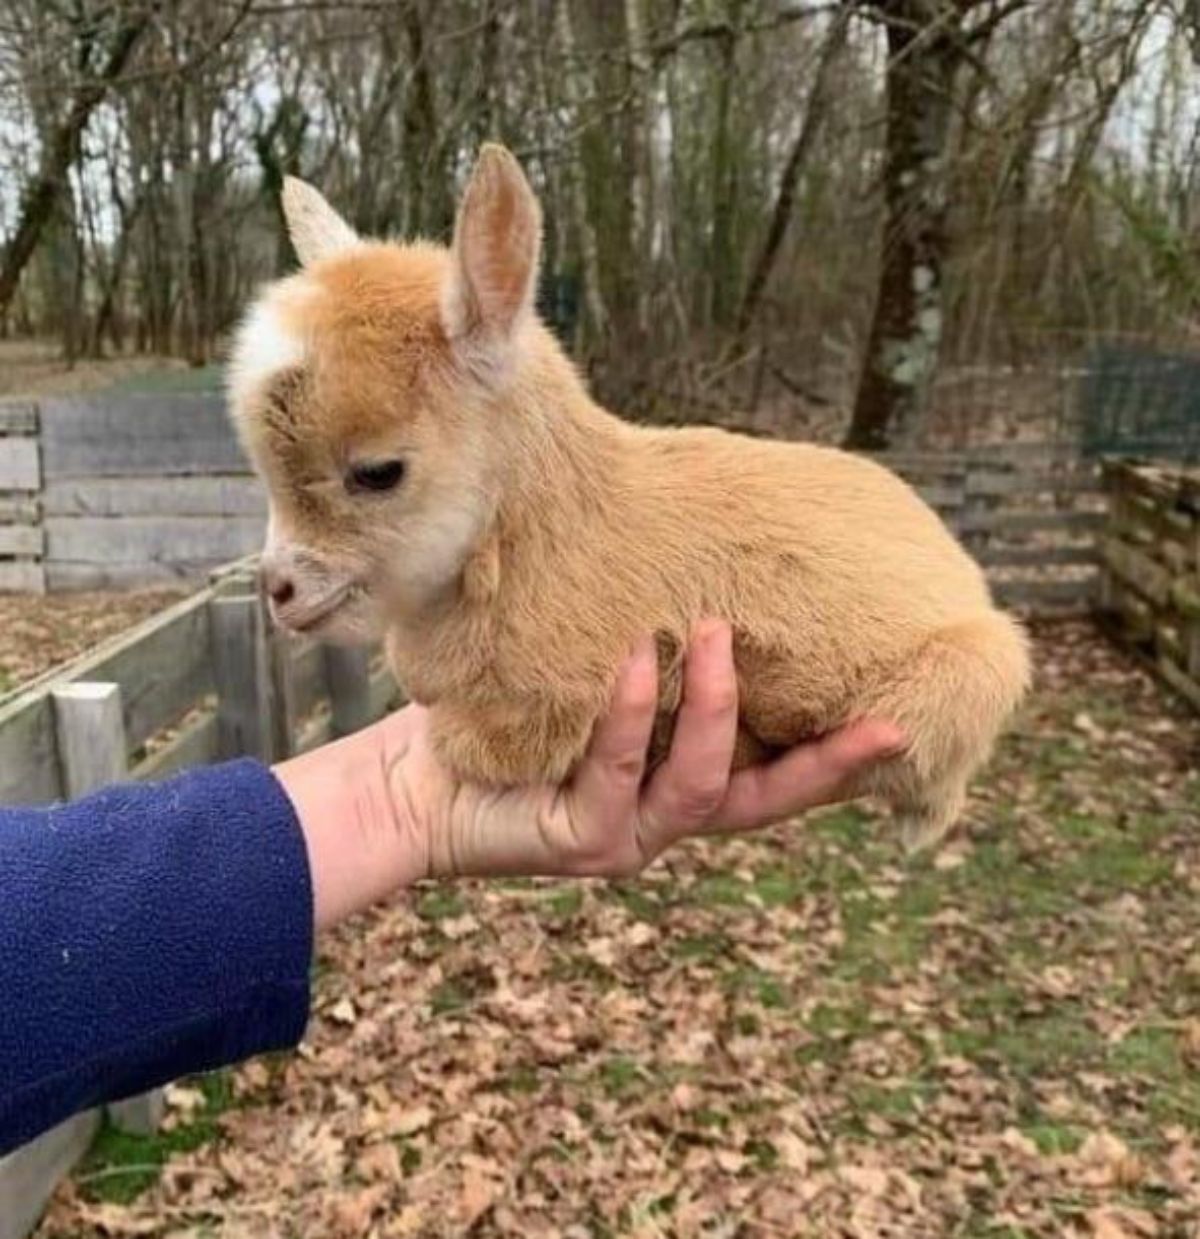 brown baby goat being held in someone's hand